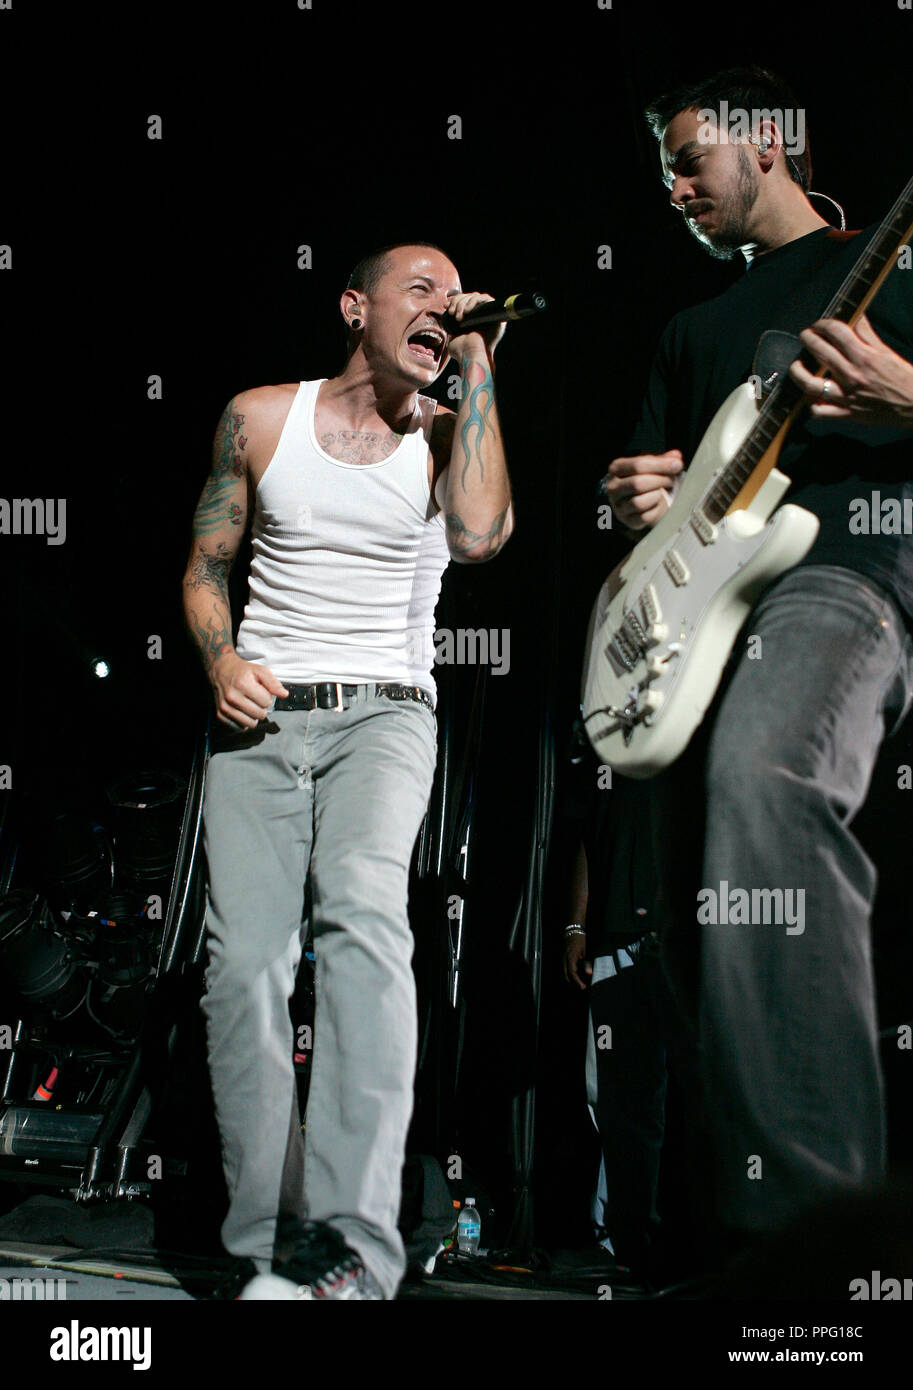 Chester Bennington (L) and Mike Shinoda with Linkin Park perform in concert at the Cruzan Amphitheatre in West Palm Beach, Florida on August 1, 2008. Stock Photo